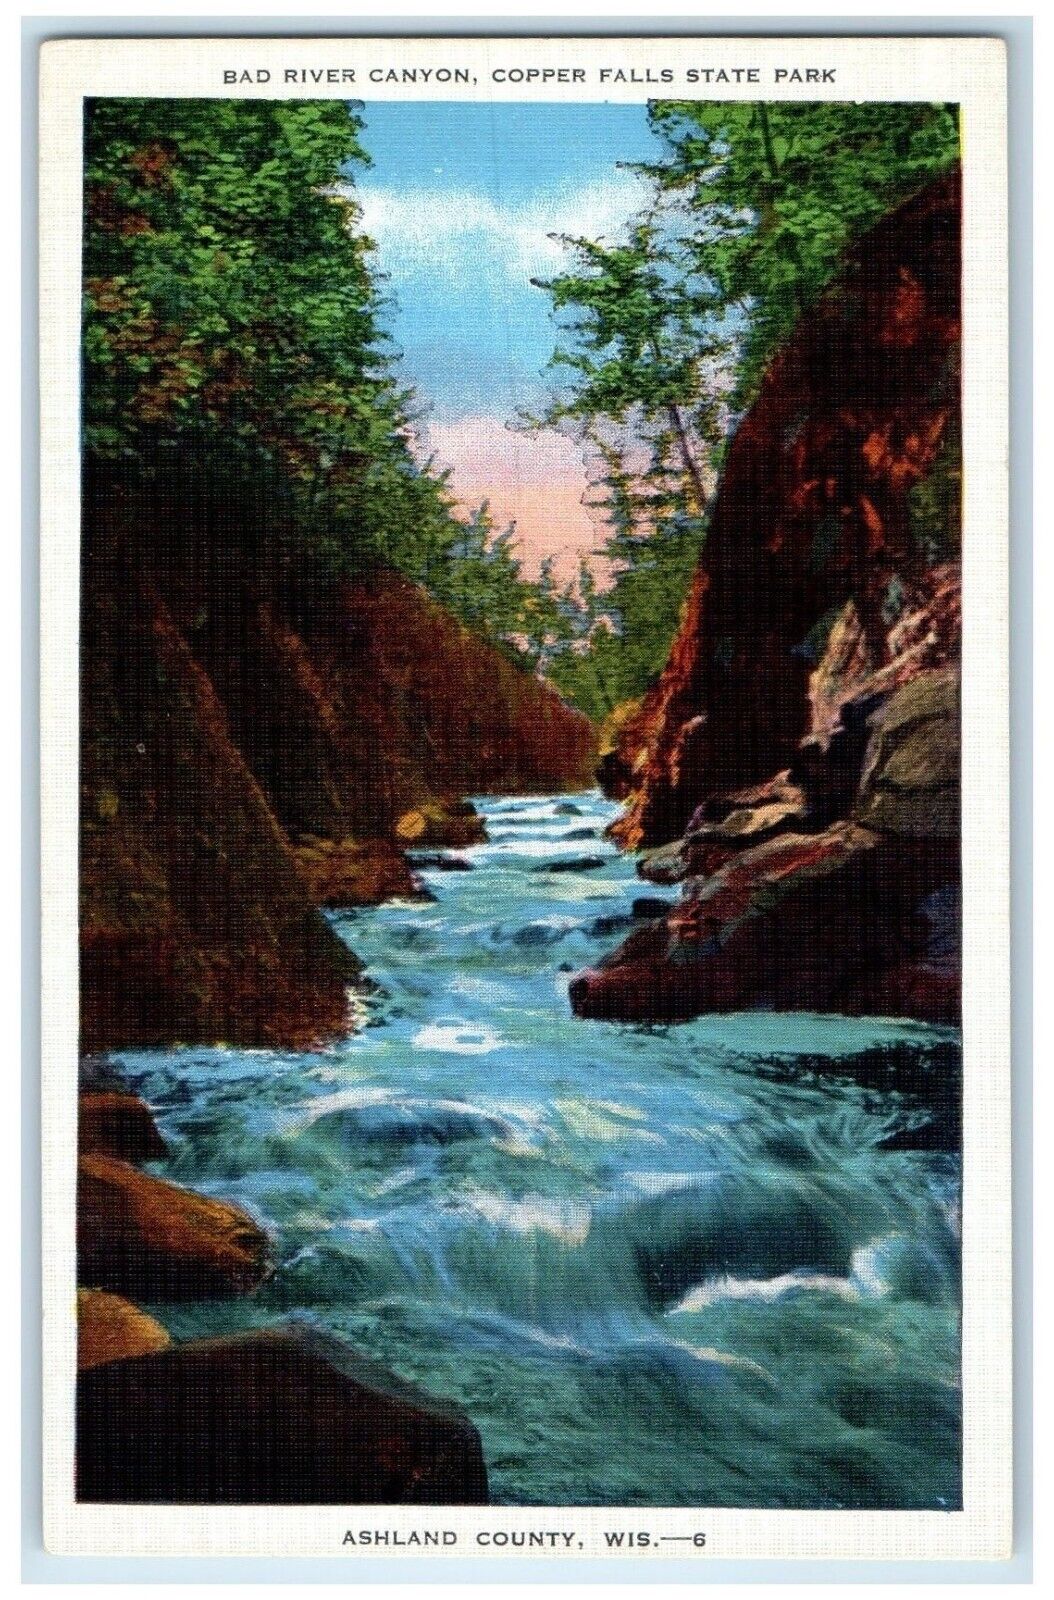 c1940 Bad River Canyon Copper Falls State Park Ashland County Wisconsin Postcard